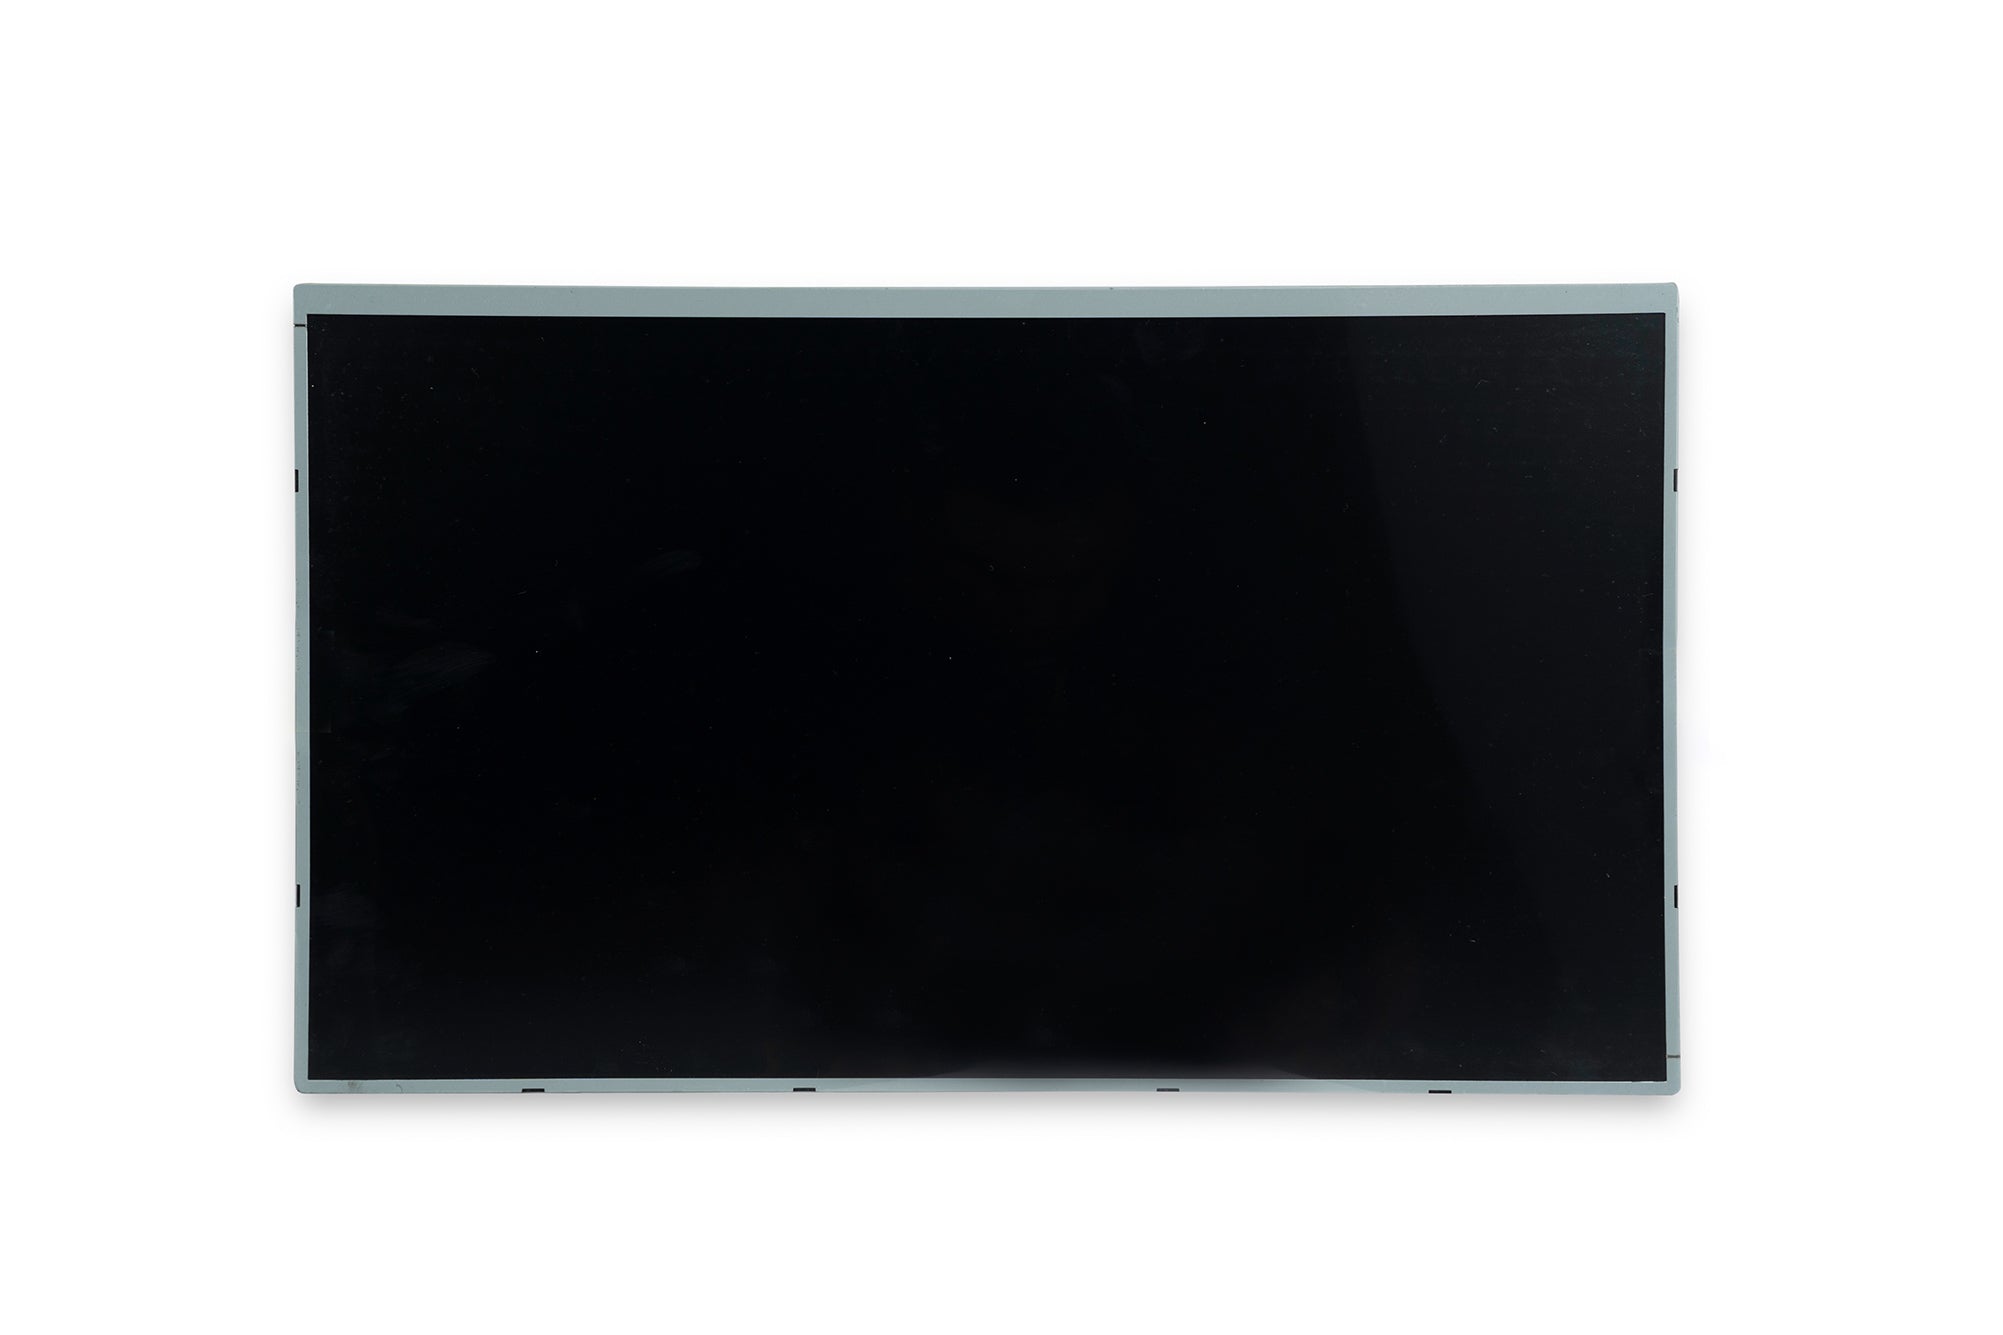 LCD Panel to suit A600 & A620 EVO 21.5" topper - MV215FHM-N30 B4